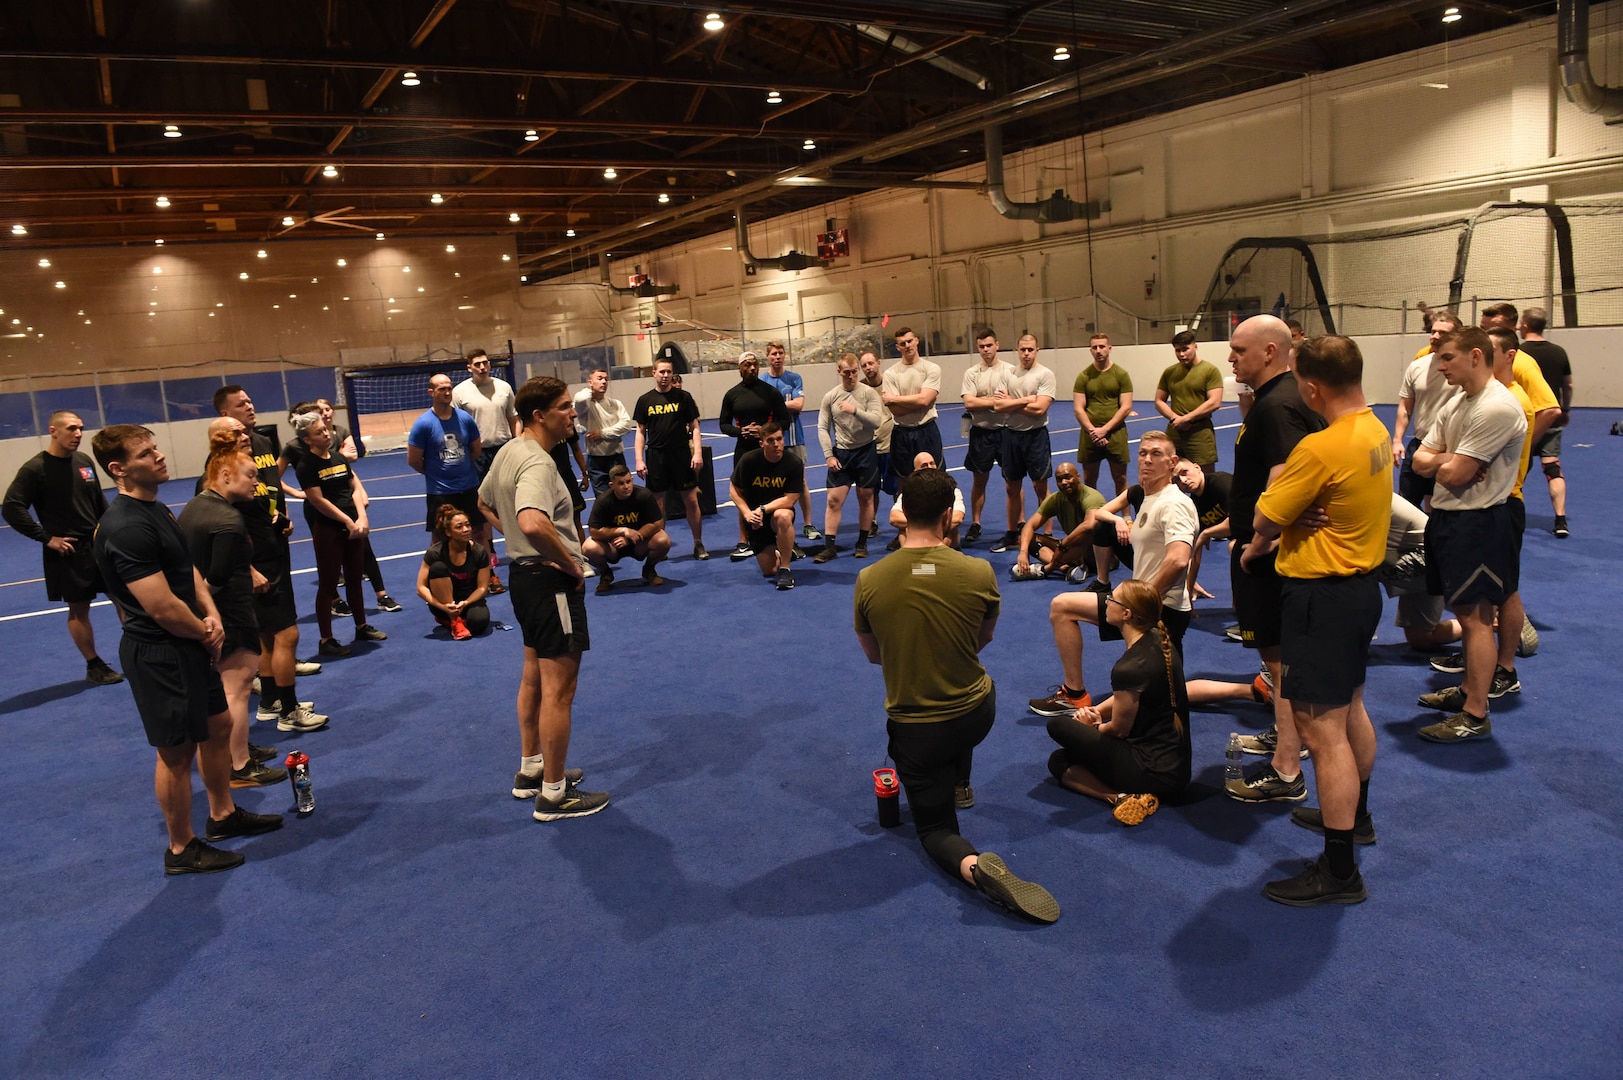 Secretary of Defense Dr. Mark T. Esper engages with U.S. Strategic Command (USSTRATCOM) and 55th Wing service members at the field house at Offutt Air Force Base, Neb., Feb. 20, 2020. Esper participated in circuit training with more than 40 USSTRATCOM and 55th Wing service members, following up the workout with a question and answer session.